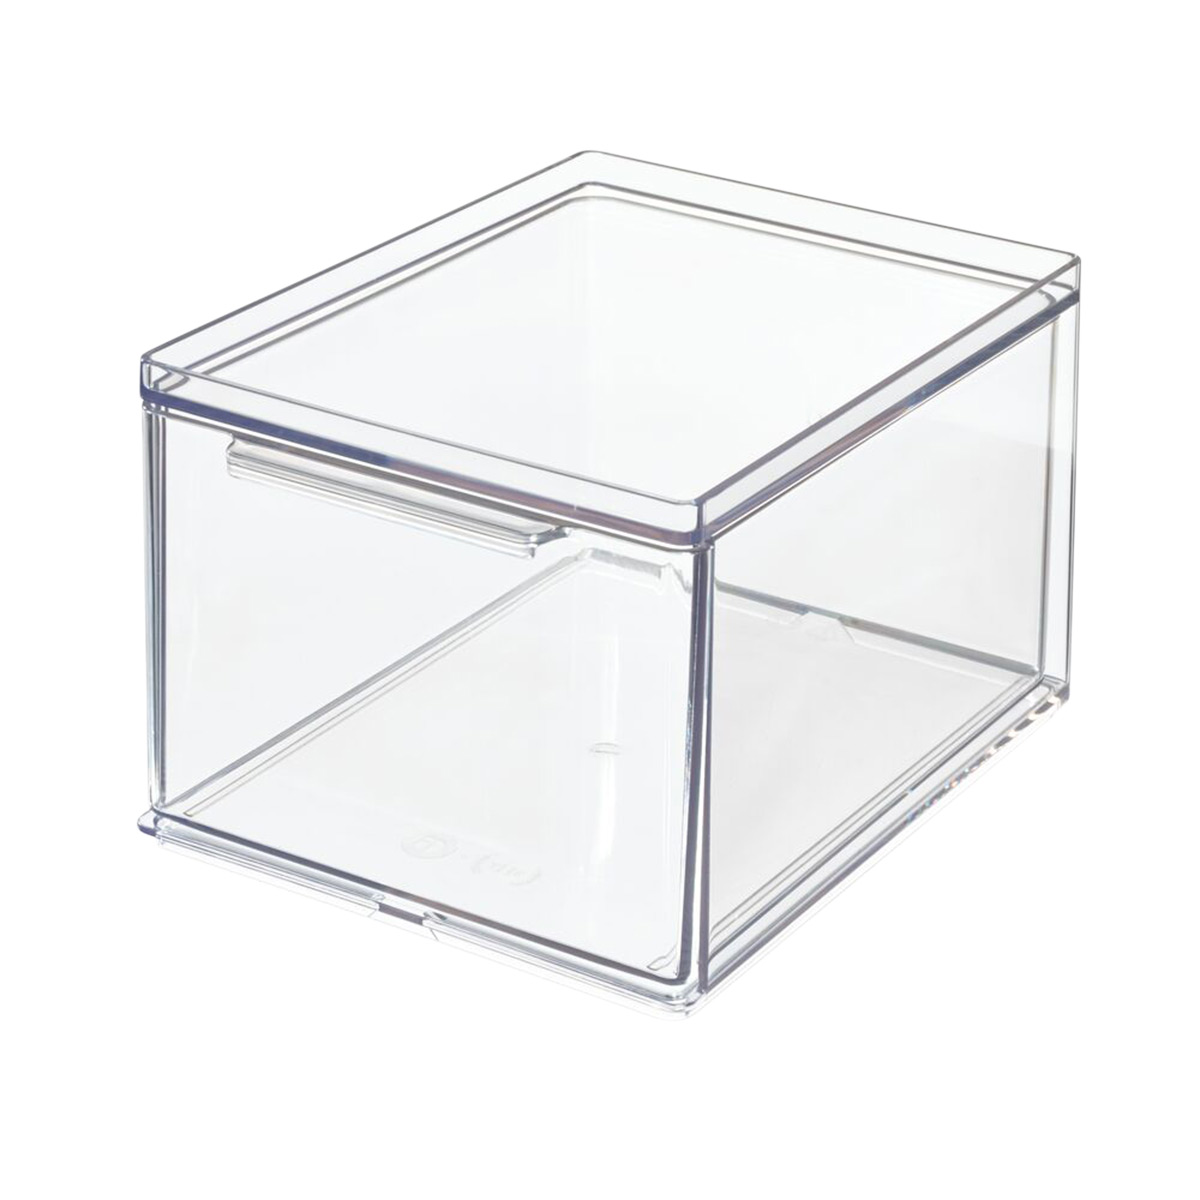 https://www.containerstore.com/catalogimages/392952/10082298-THE-Drawer-Small-Deep-VEN2.jpg